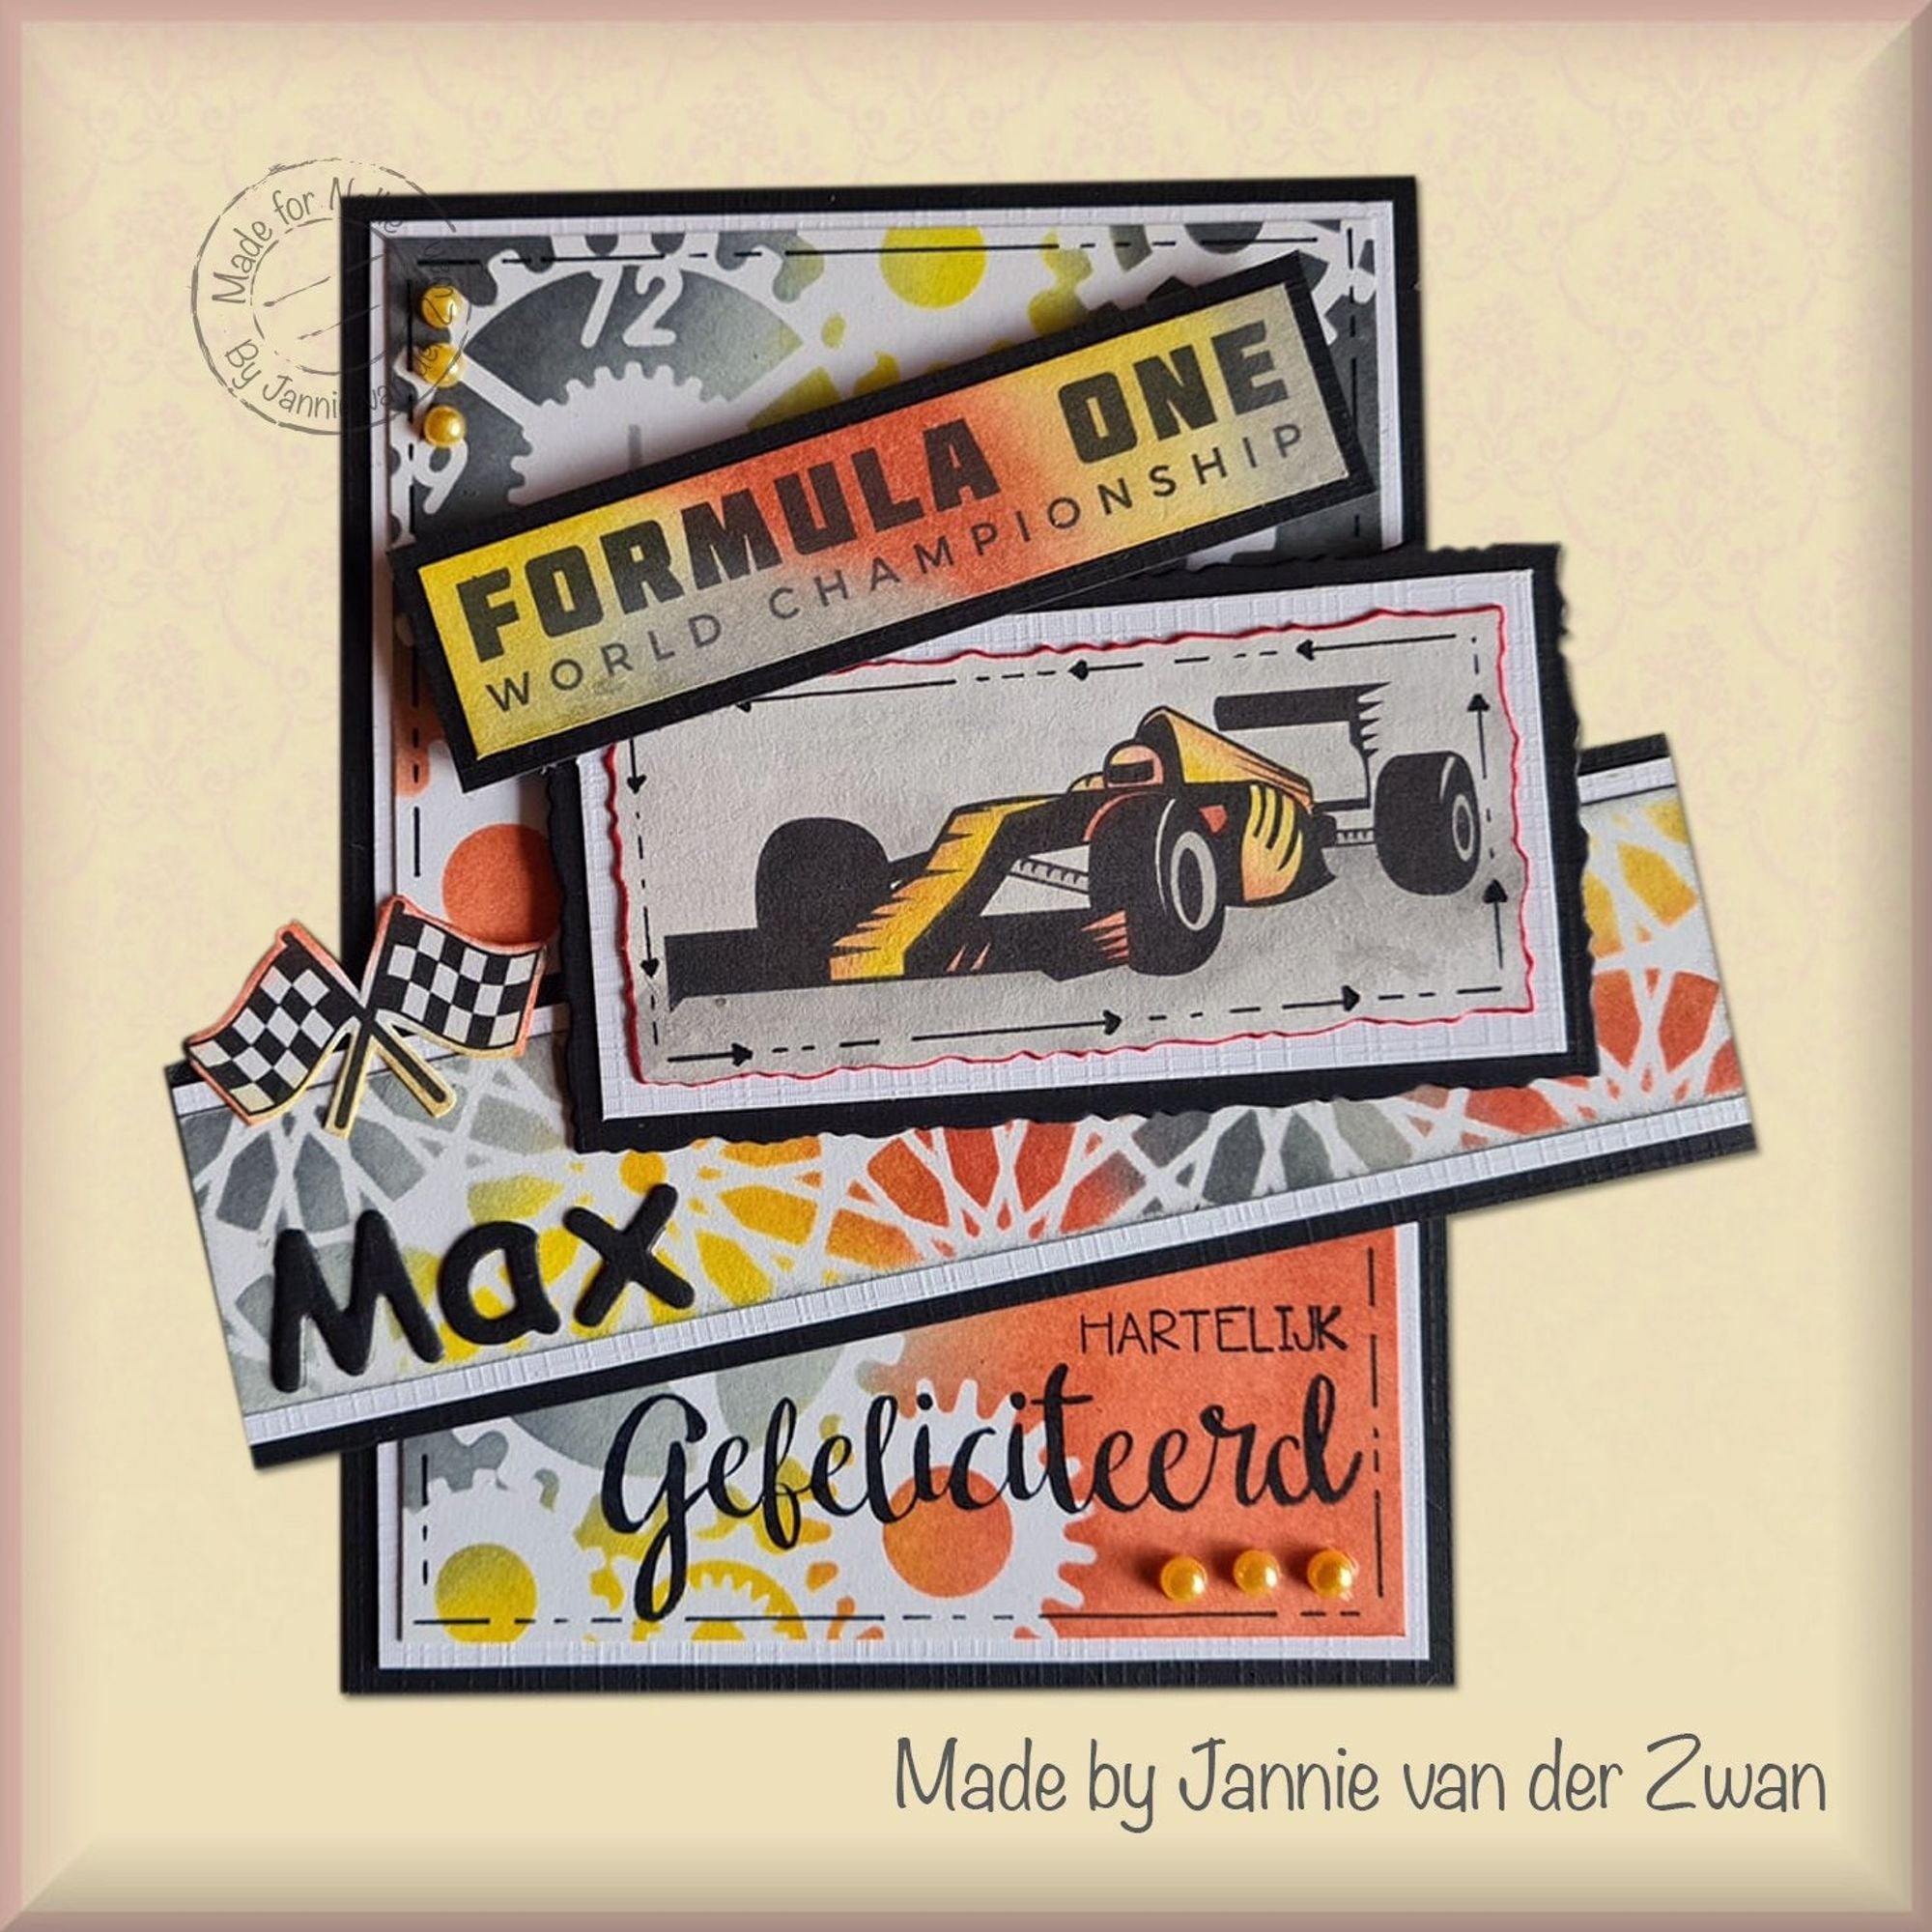 Nellie's Choice Clear Stamp Silhouette - Formula One Series-3